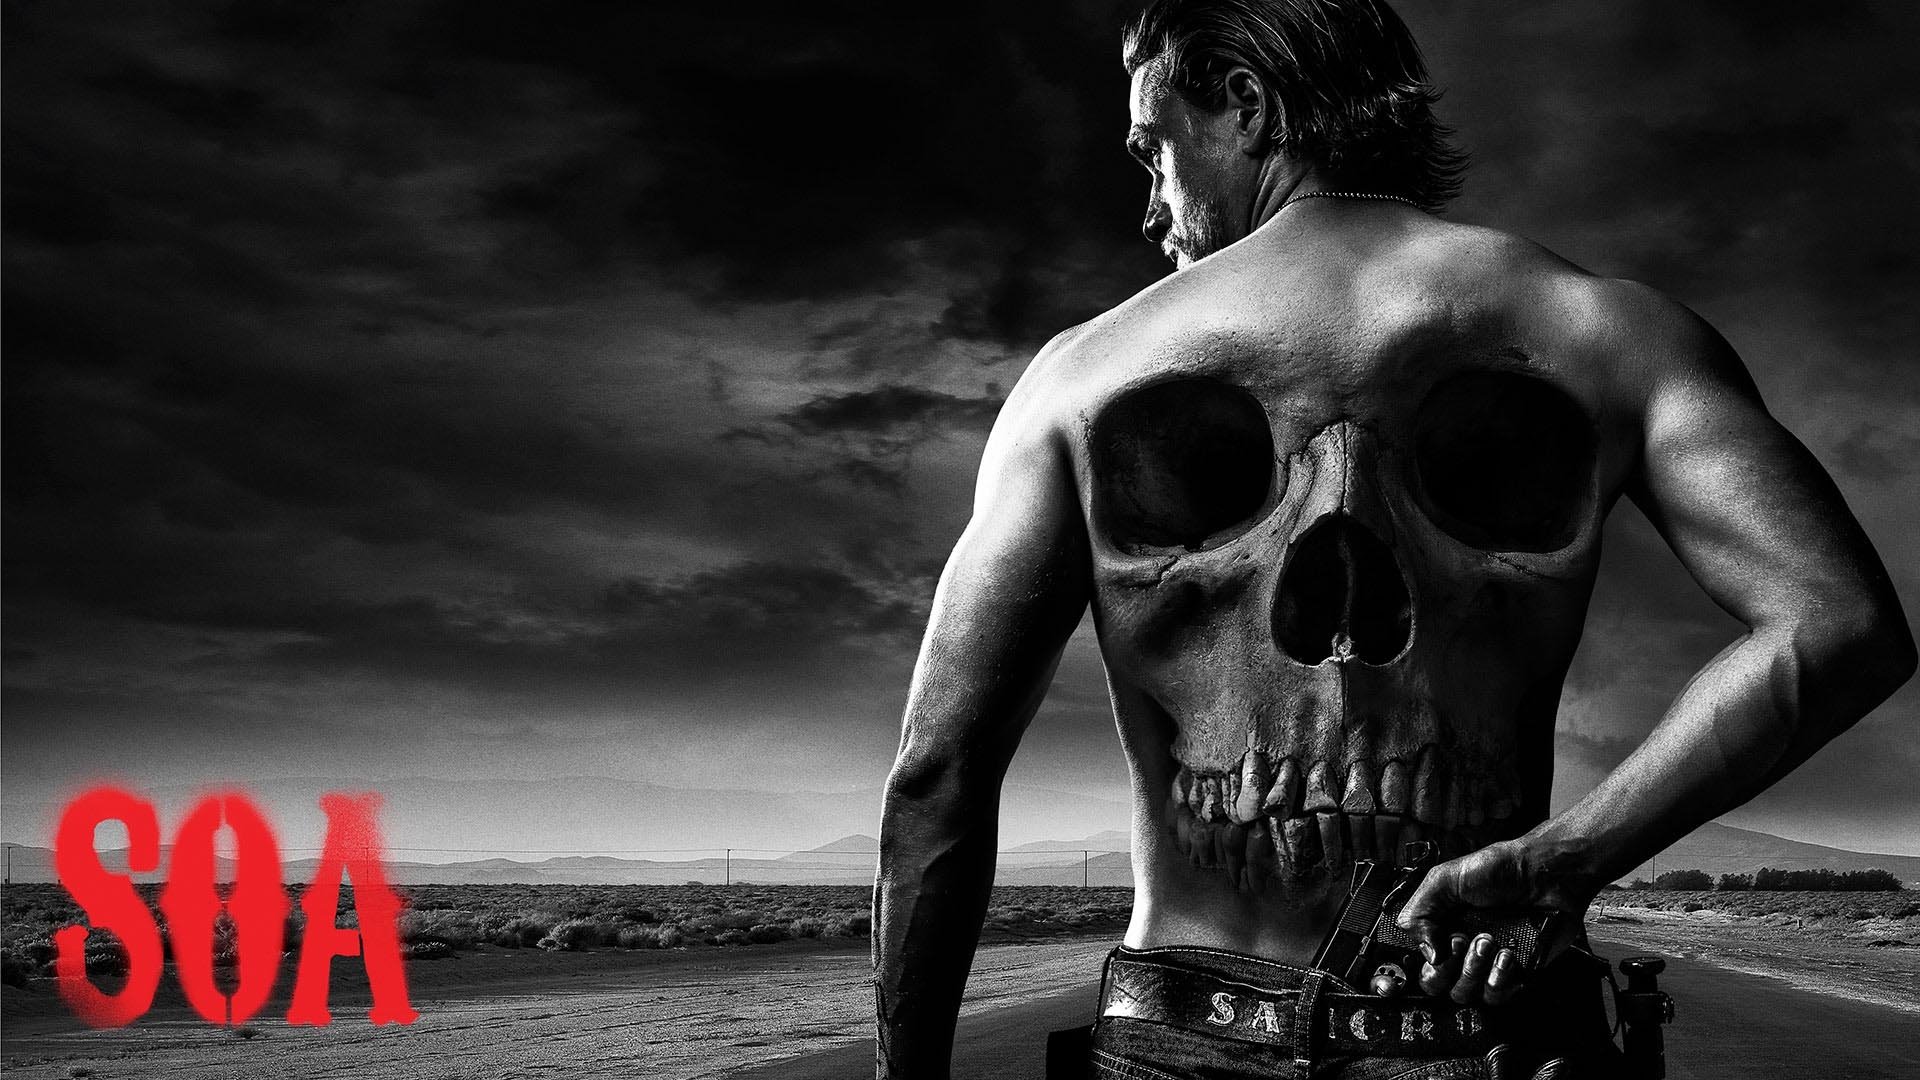 Sons of anarchy 1080P 2K 4K 5K HD wallpapers free download  Wallpaper  Flare